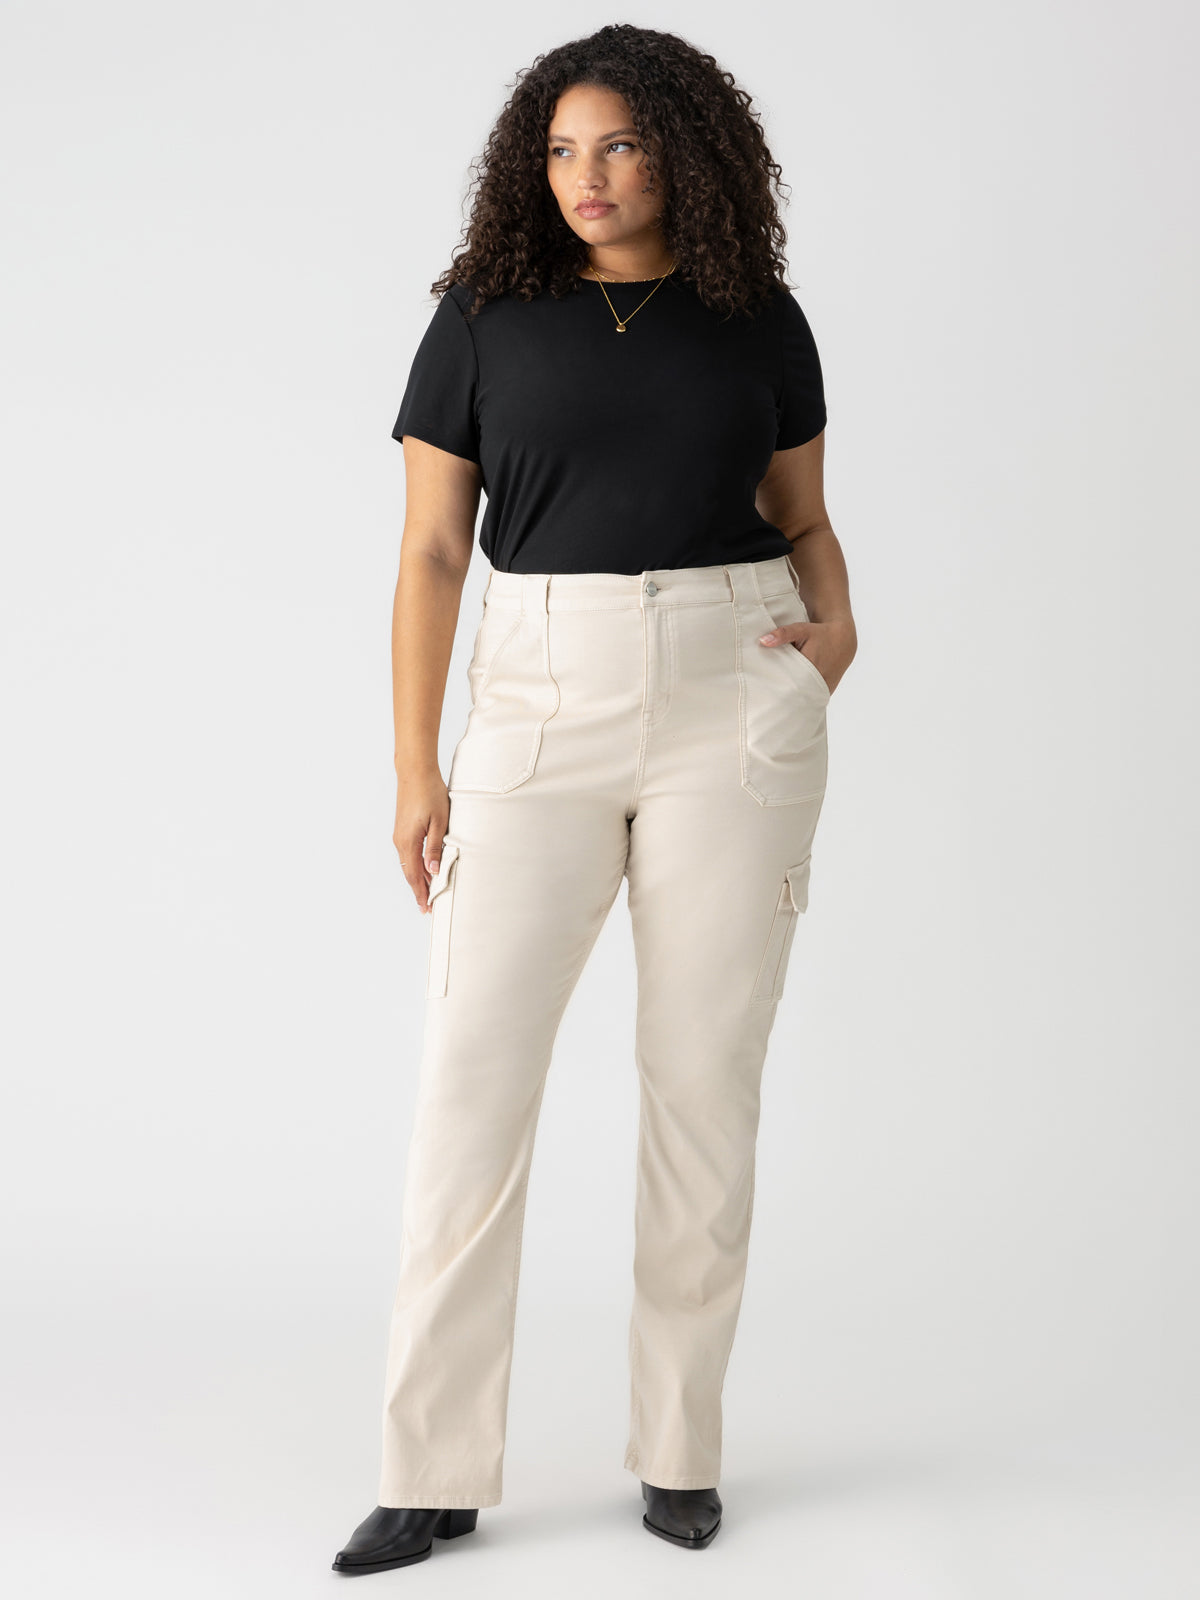 Sculpted Hayden Bootcut Standard Rise Pant Toasted Almond Inclusive Collection